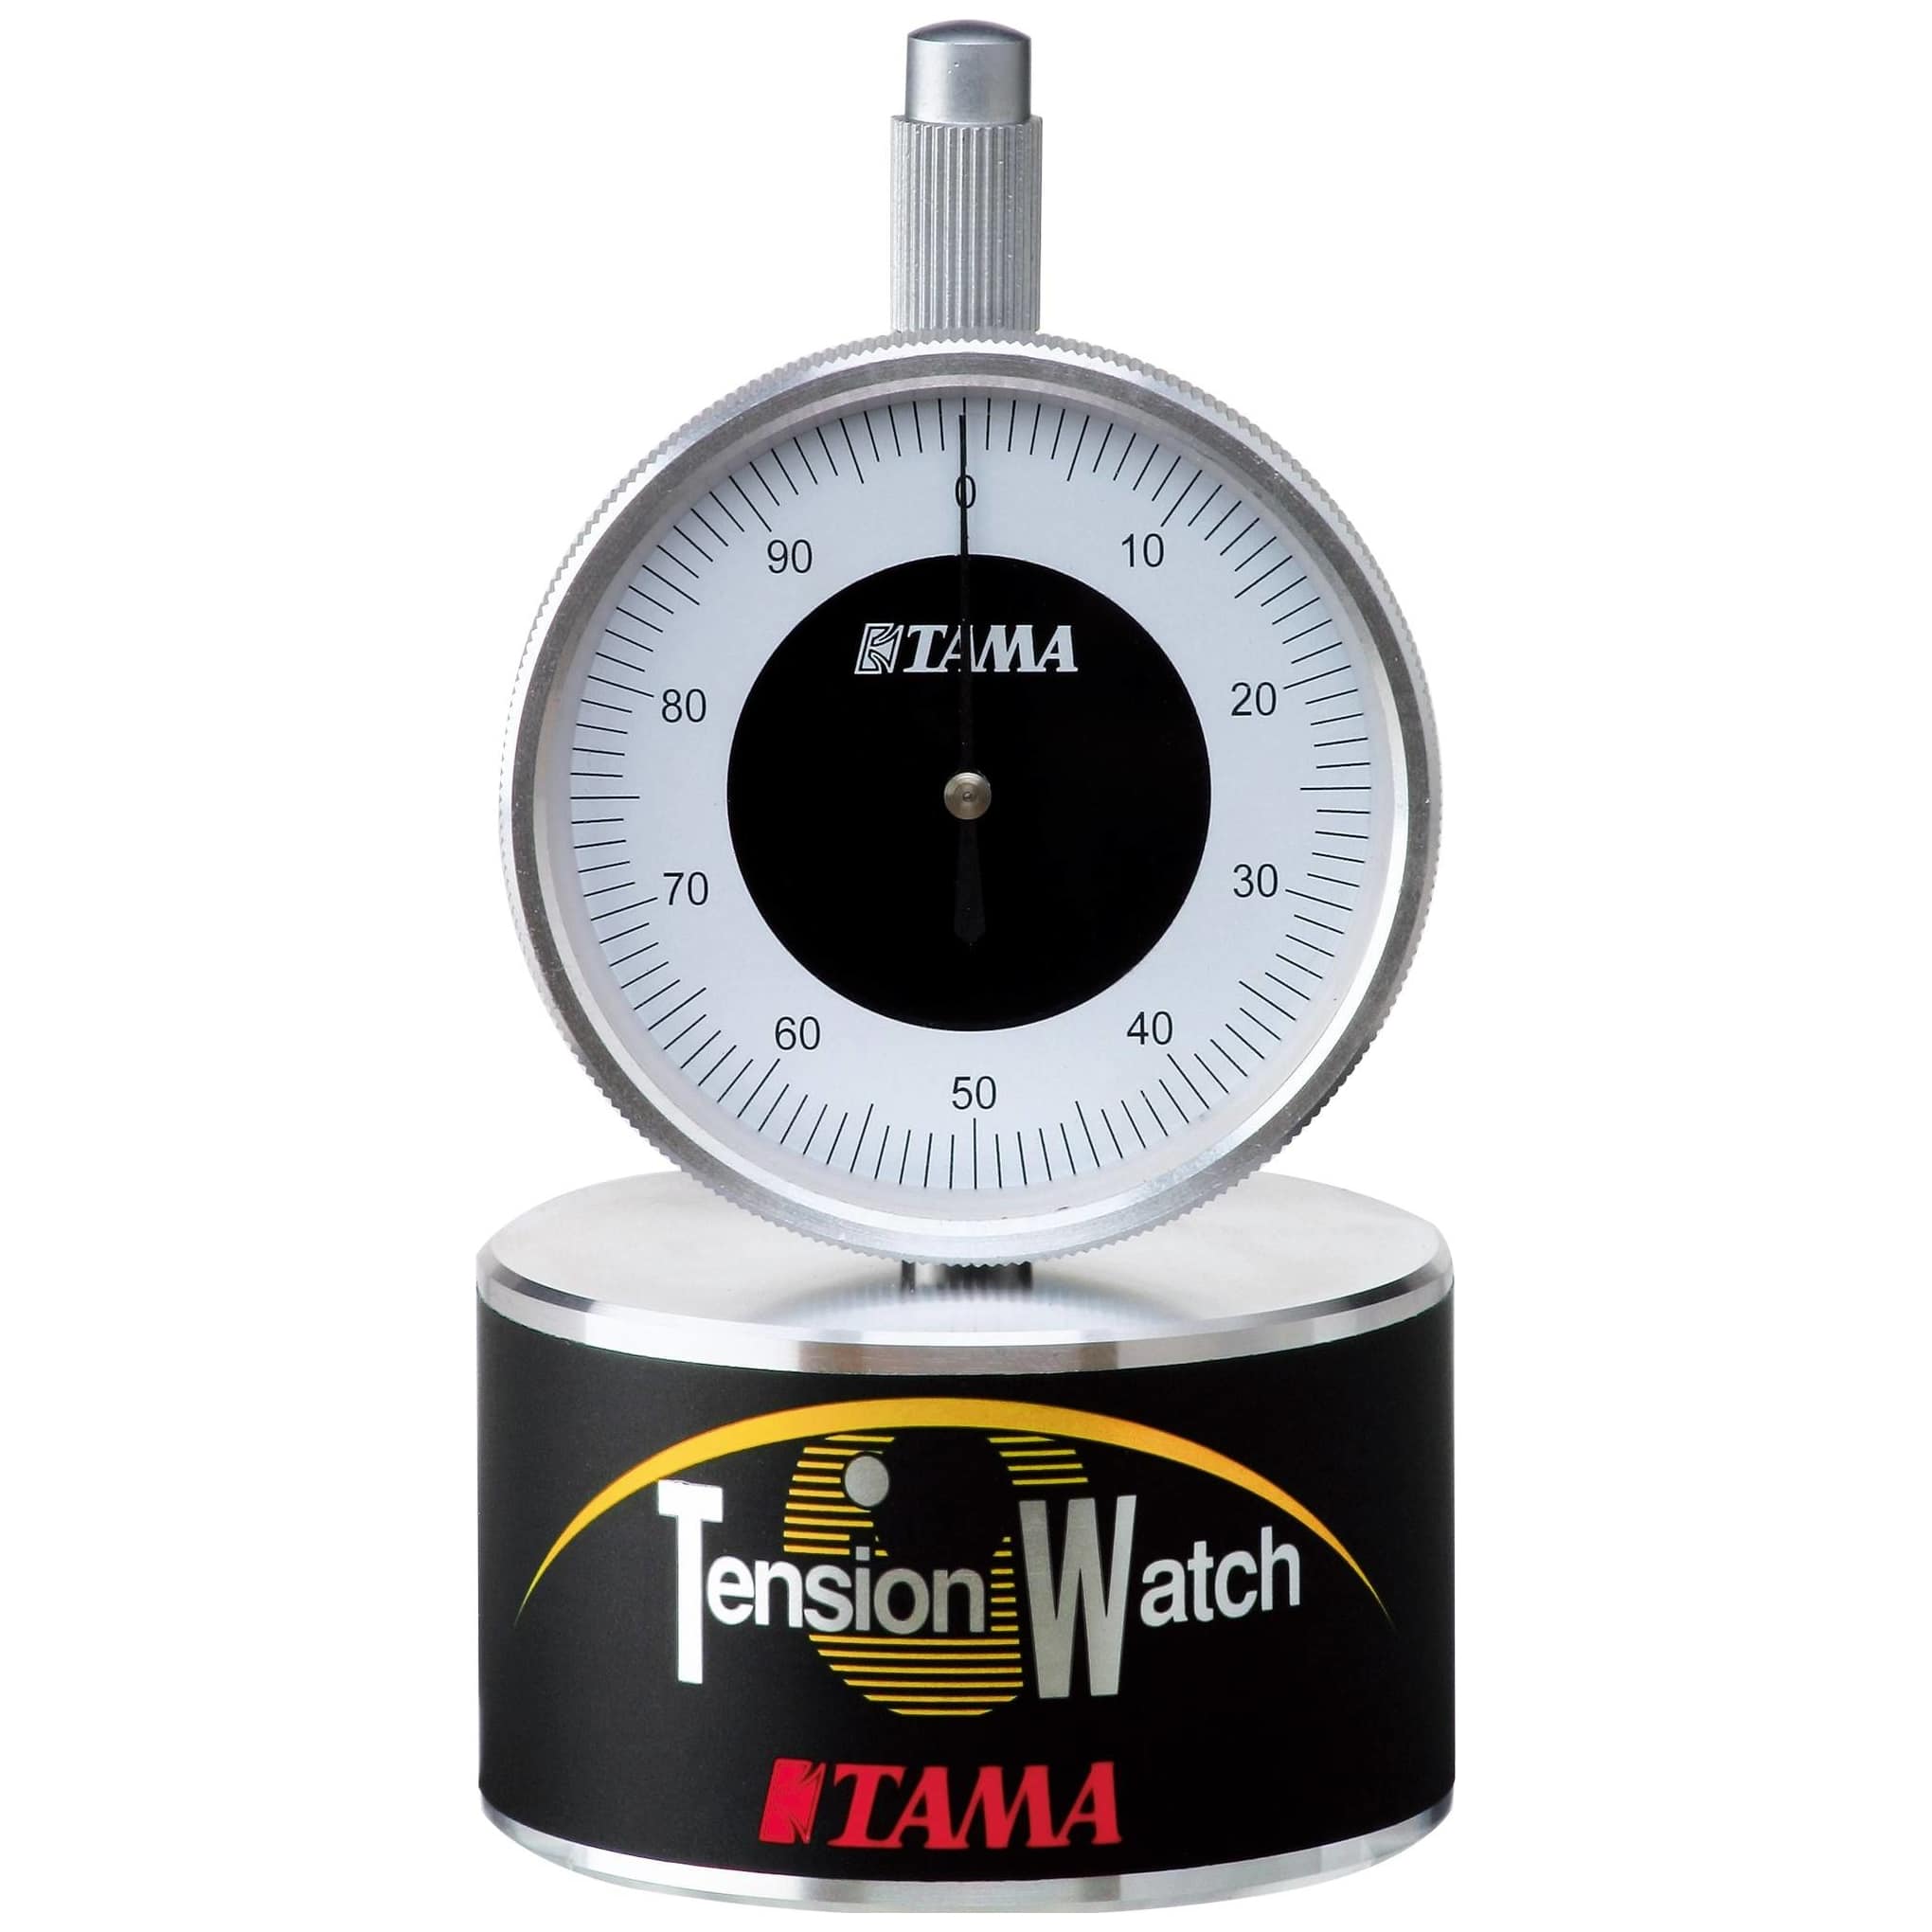 Tama TW100 - Tension Watch